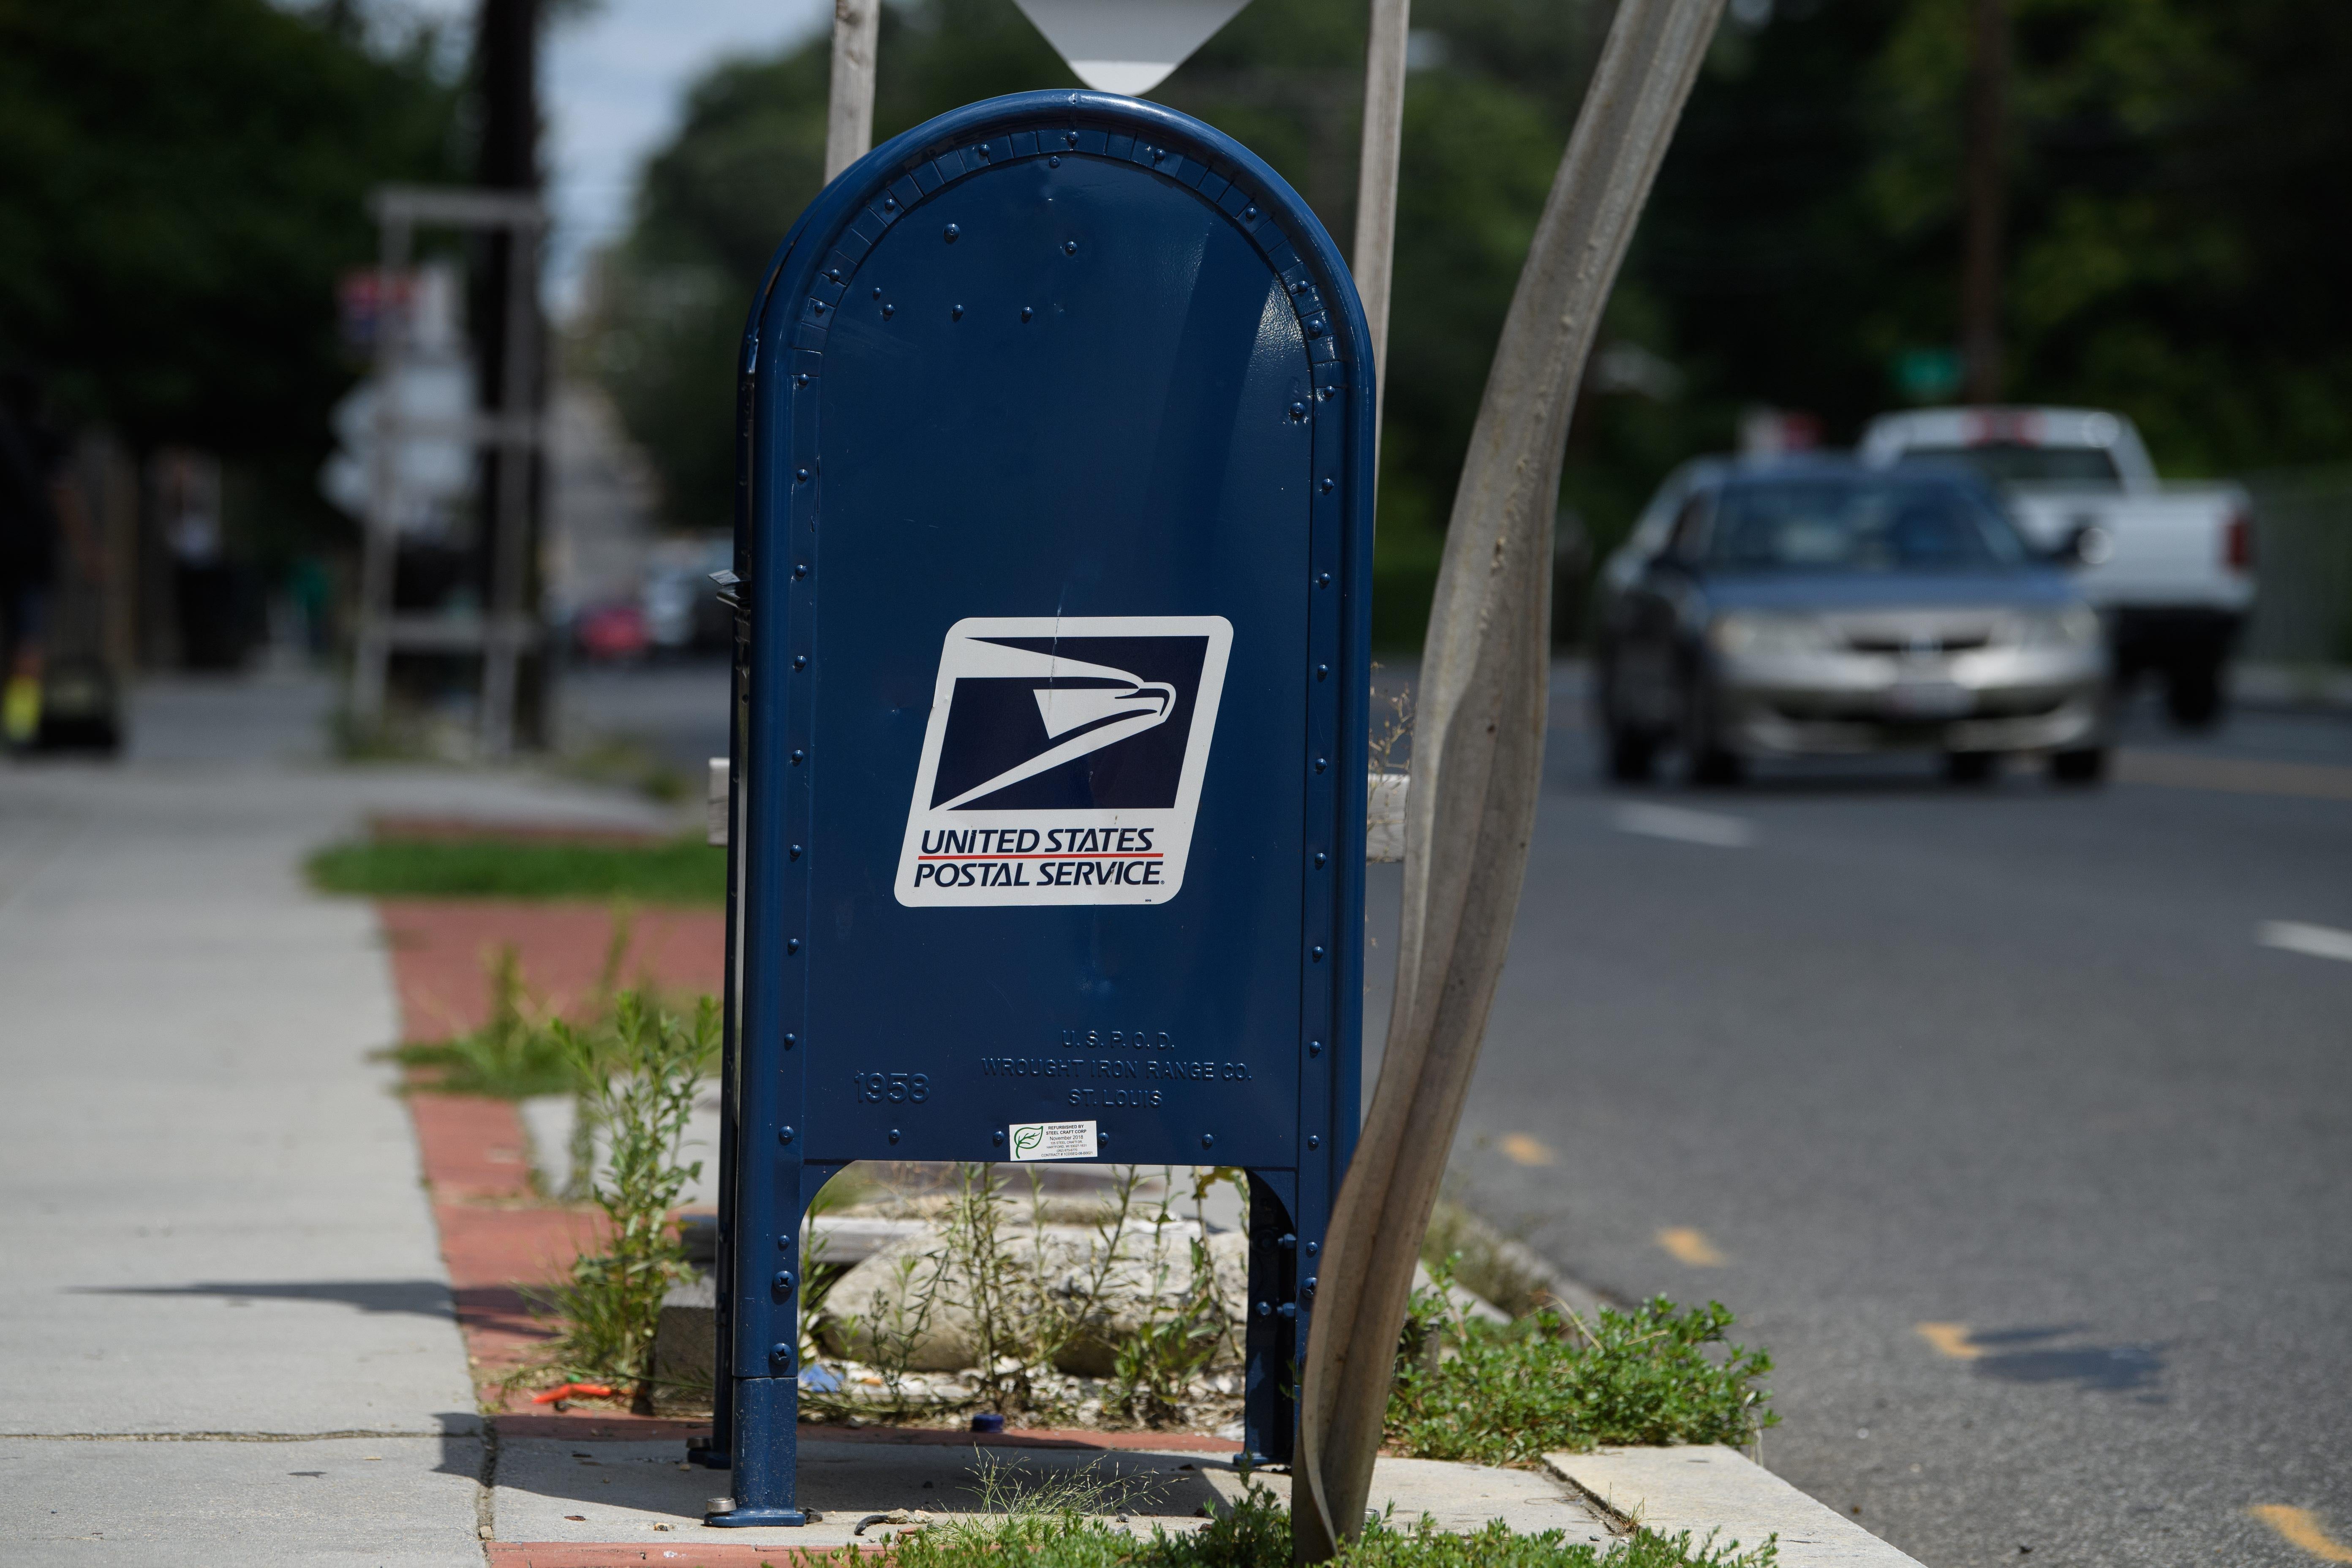 A United States Postal Service (USPS) mailbox stands in front of a post office in Washington, DC, on August 18, 2020. - The US Postal Service said on August 18 it will halt changes blamed for slowing mail delivery until after the November election, changing course in the wake of the political firestorm President Donald Trump ignited when he acknowledged he wanted to undermine the agency. (Photo by NICHOLAS KAMM / AFP) (Photo by NICHOLAS KAMM/AFP via Getty Images)